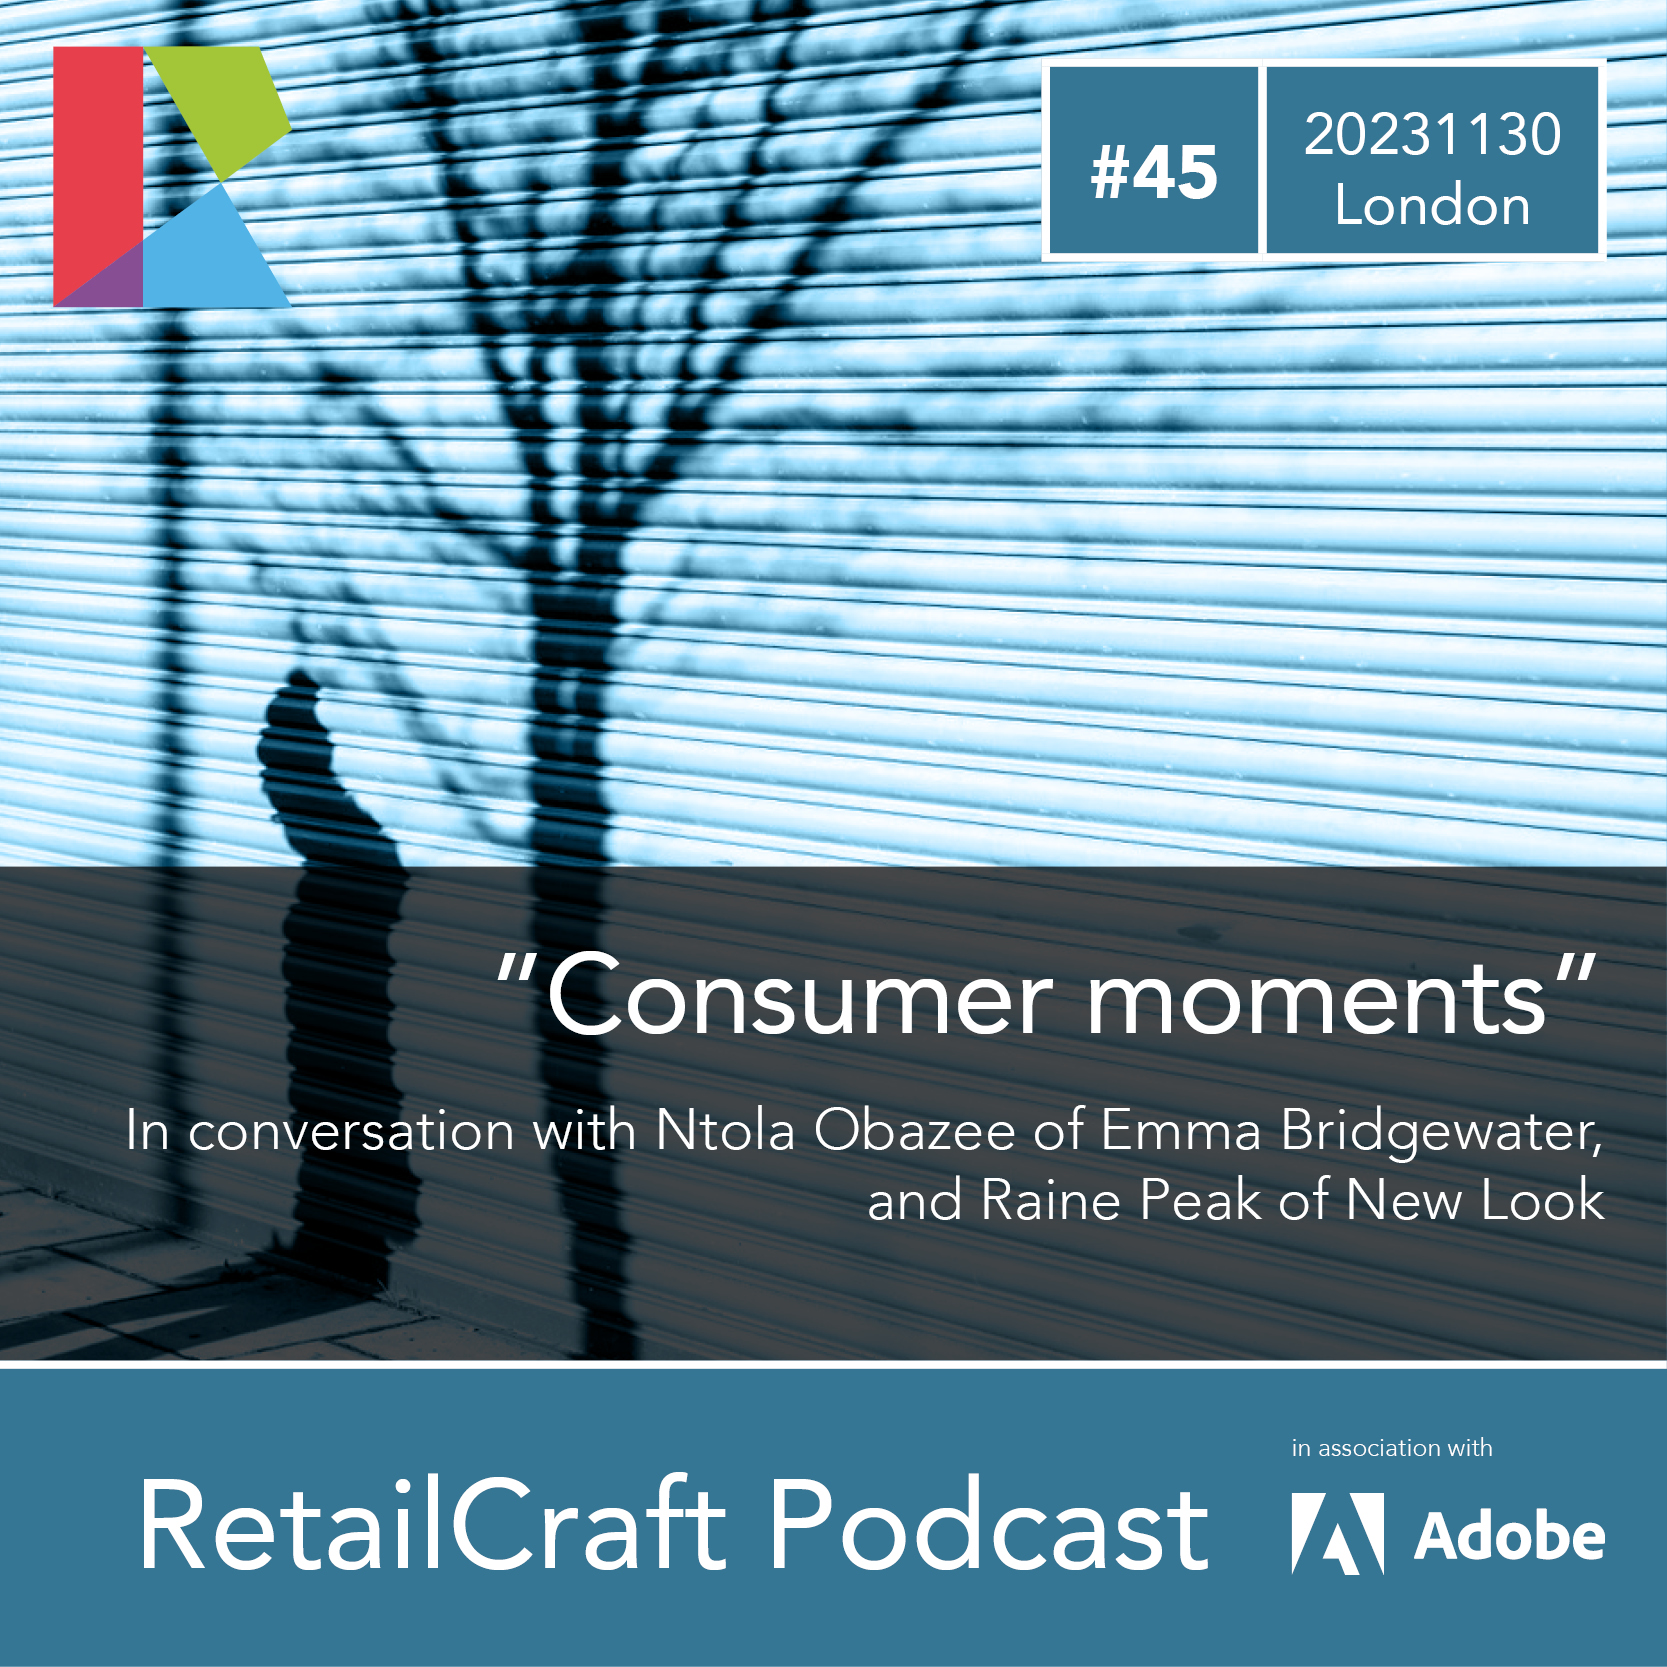 RetailCraft Podcast #45 – ”Consumer moments” – in conversation with Ntola Obazee (Emma Bridgewater) and Raine Peak (New Look)